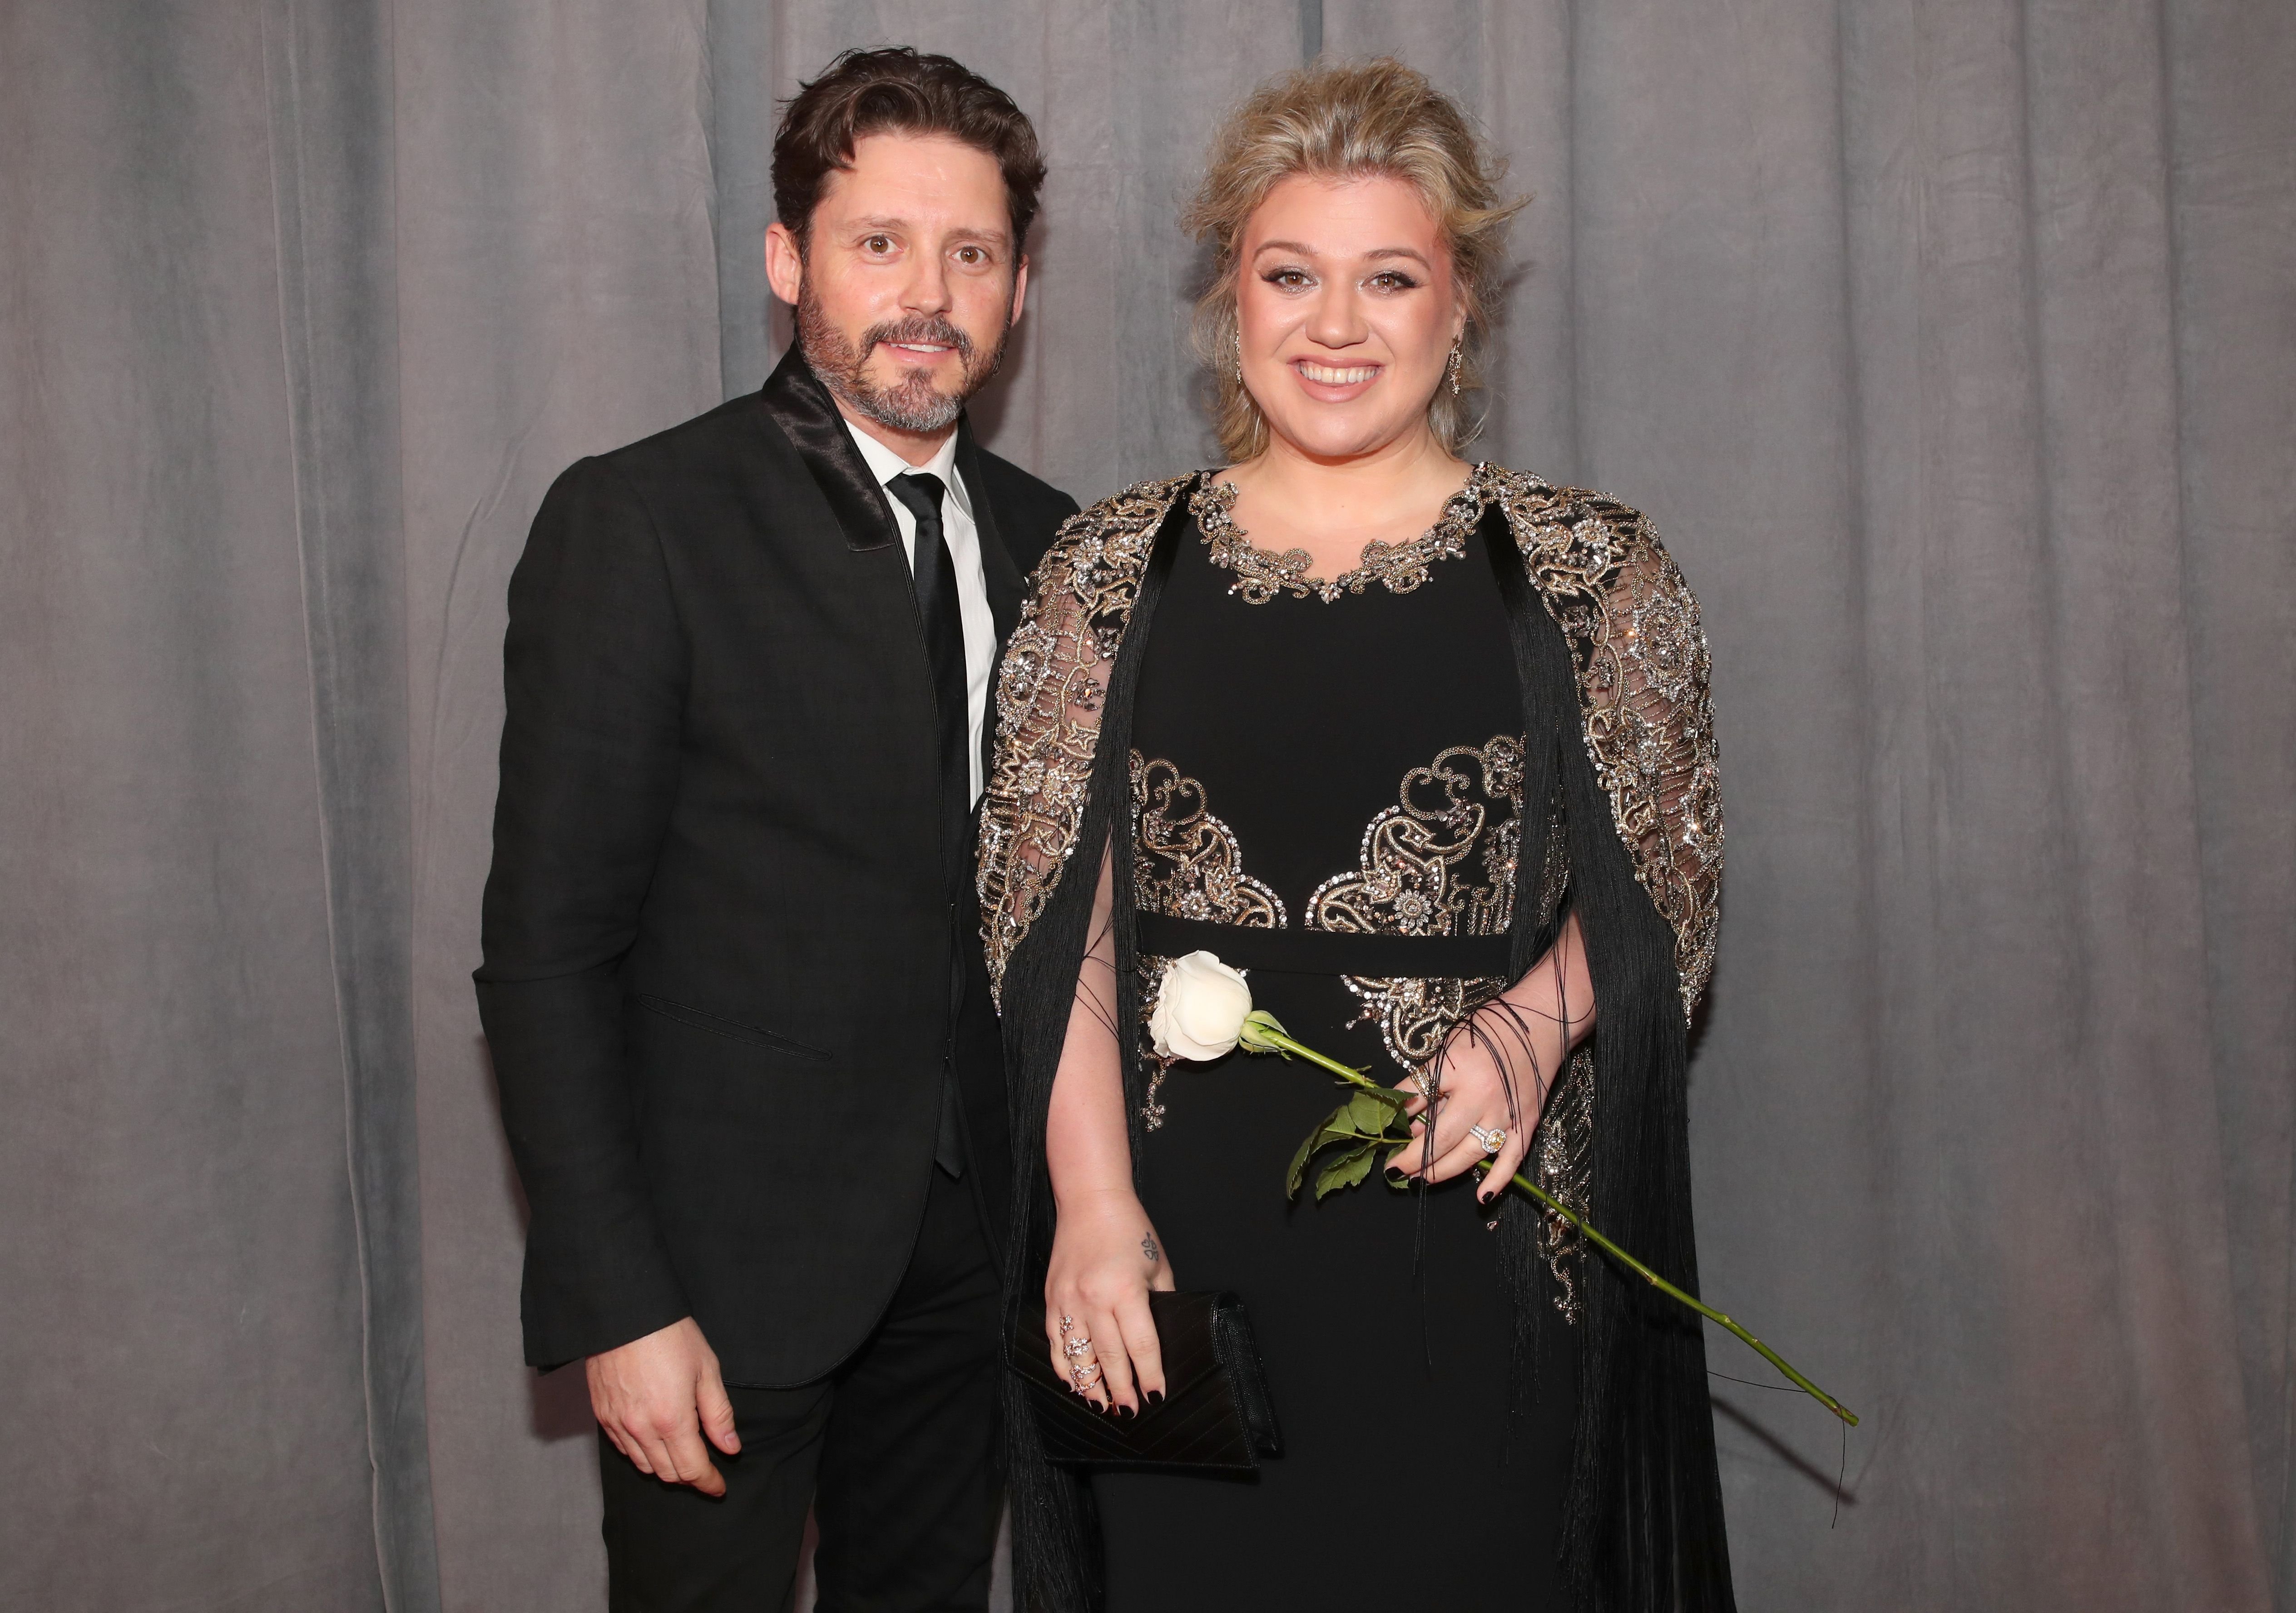 Brandon Blackstock and Kelly Clarkson at the 60th Annual GRAMMY Awards at Madison Square Garden on January 28, 2018 | Photo: Getty Images